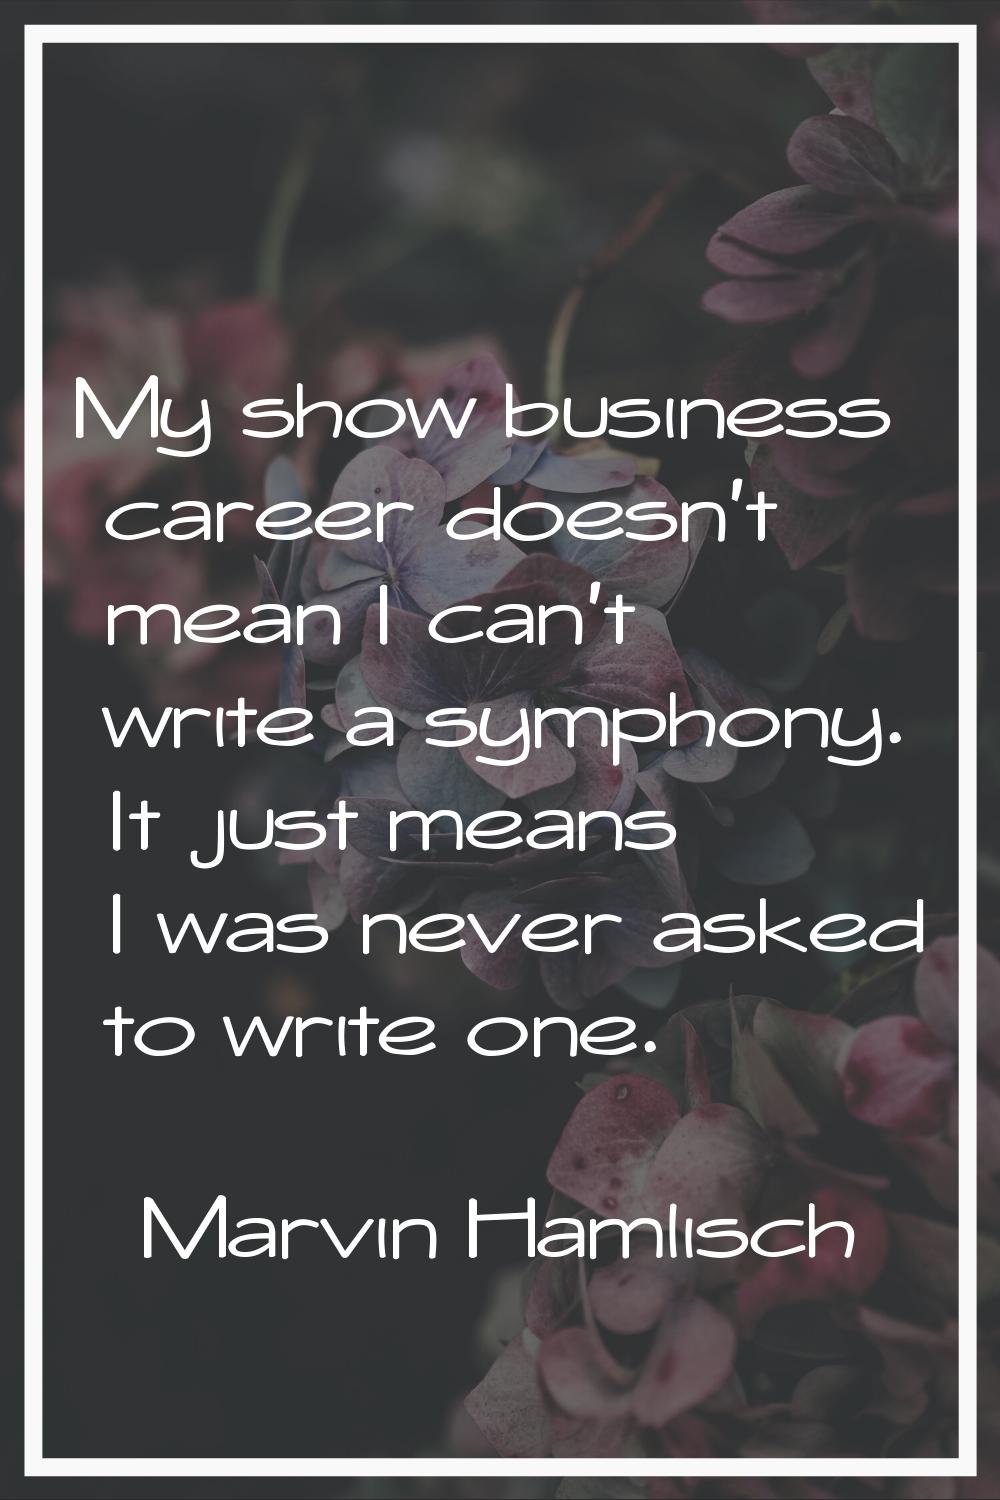 My show business career doesn't mean I can't write a symphony. It just means I was never asked to w